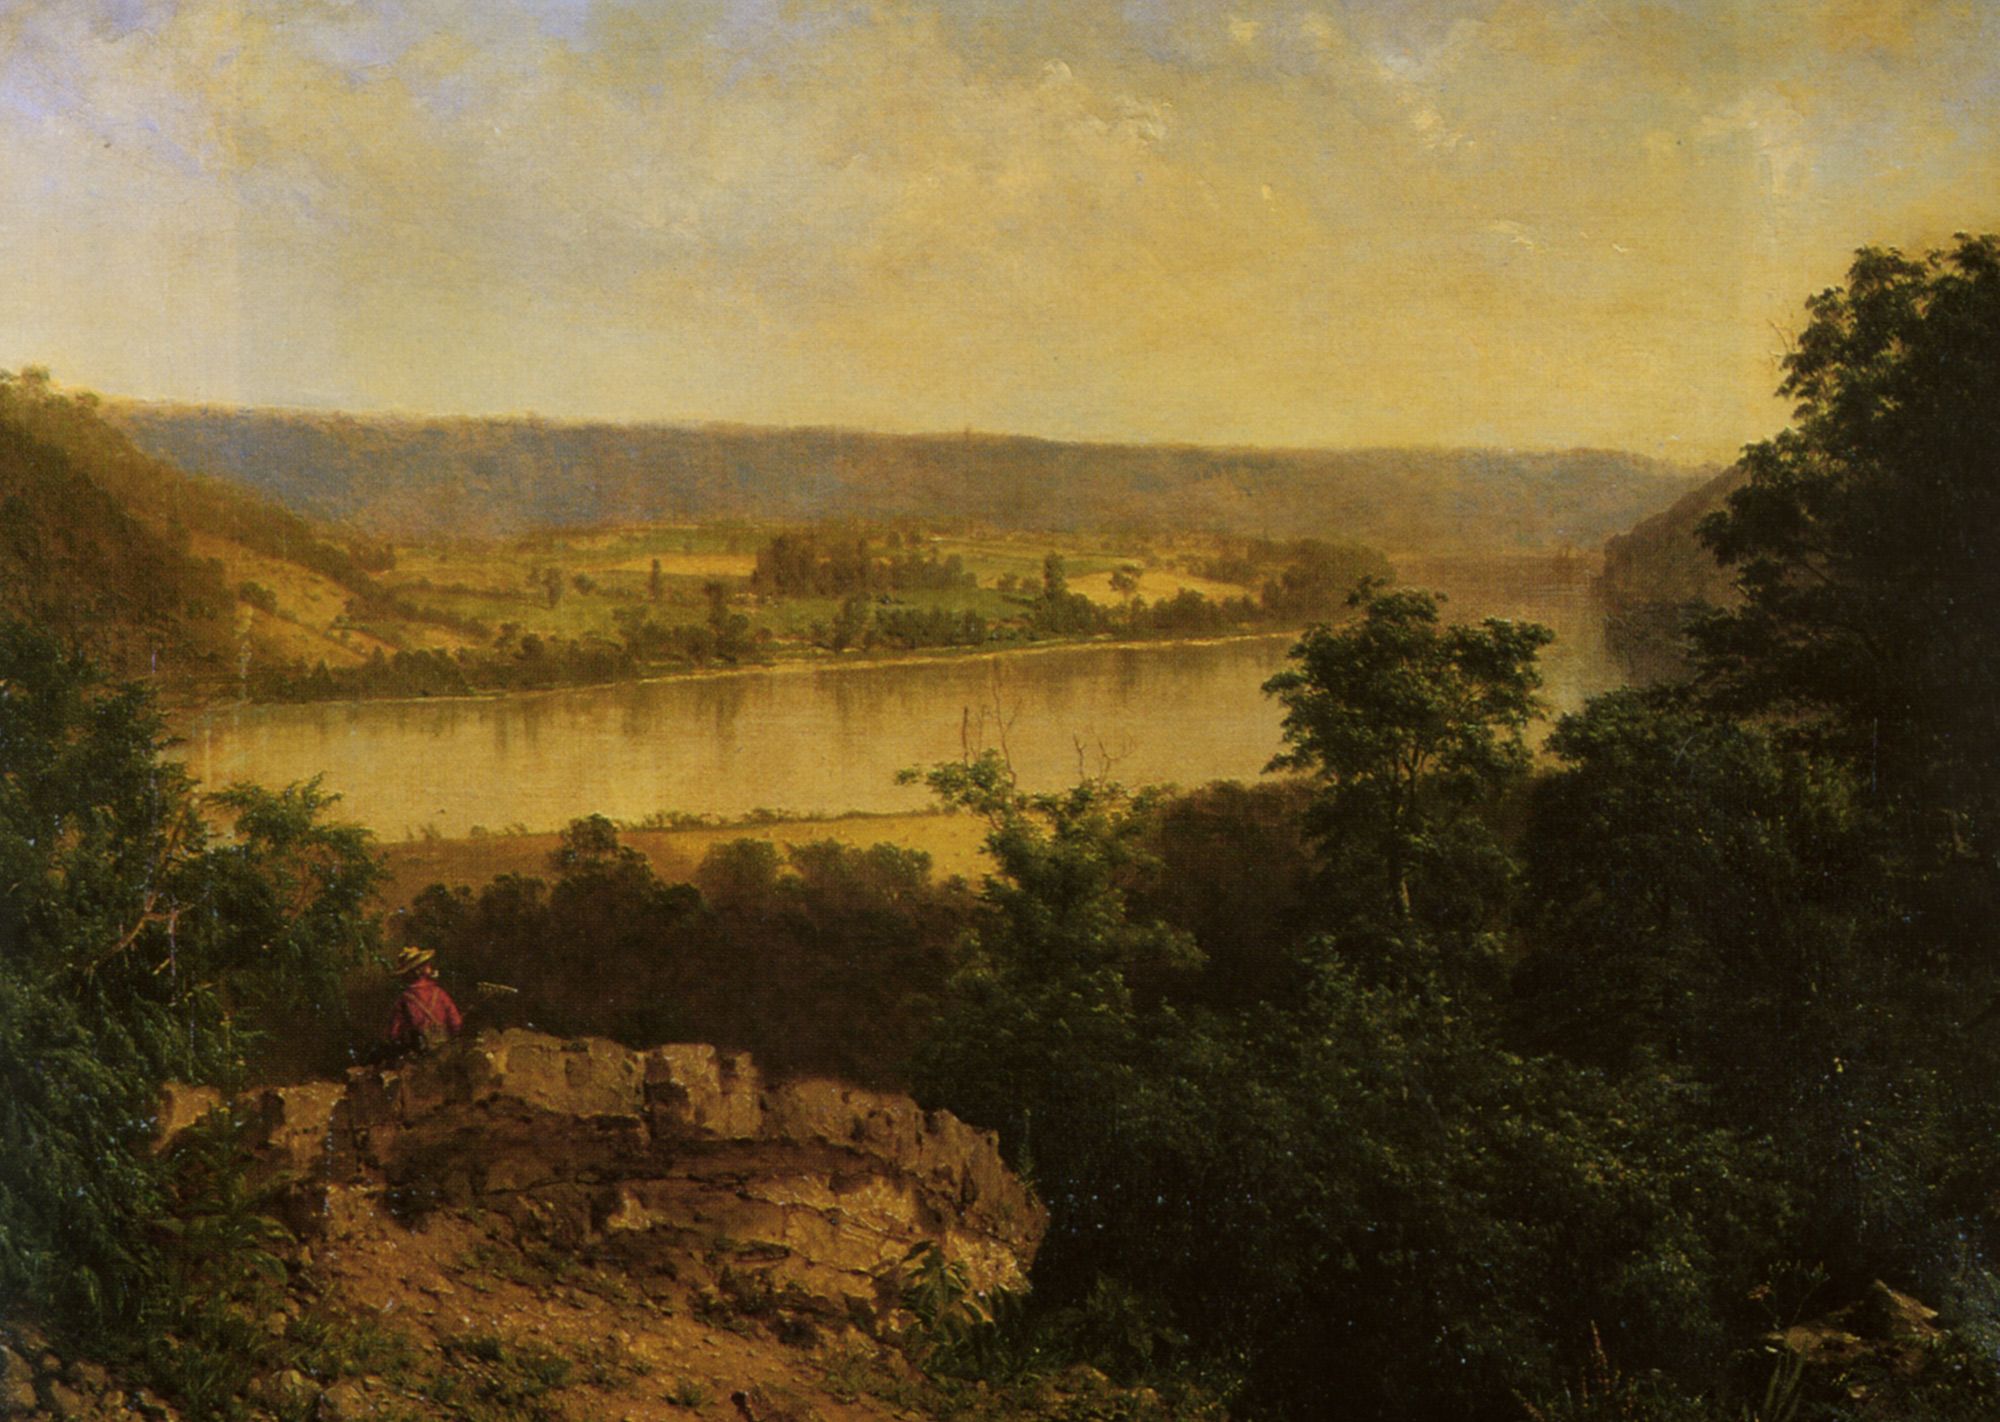 Hudson River View by Alexander Helwig Wyant